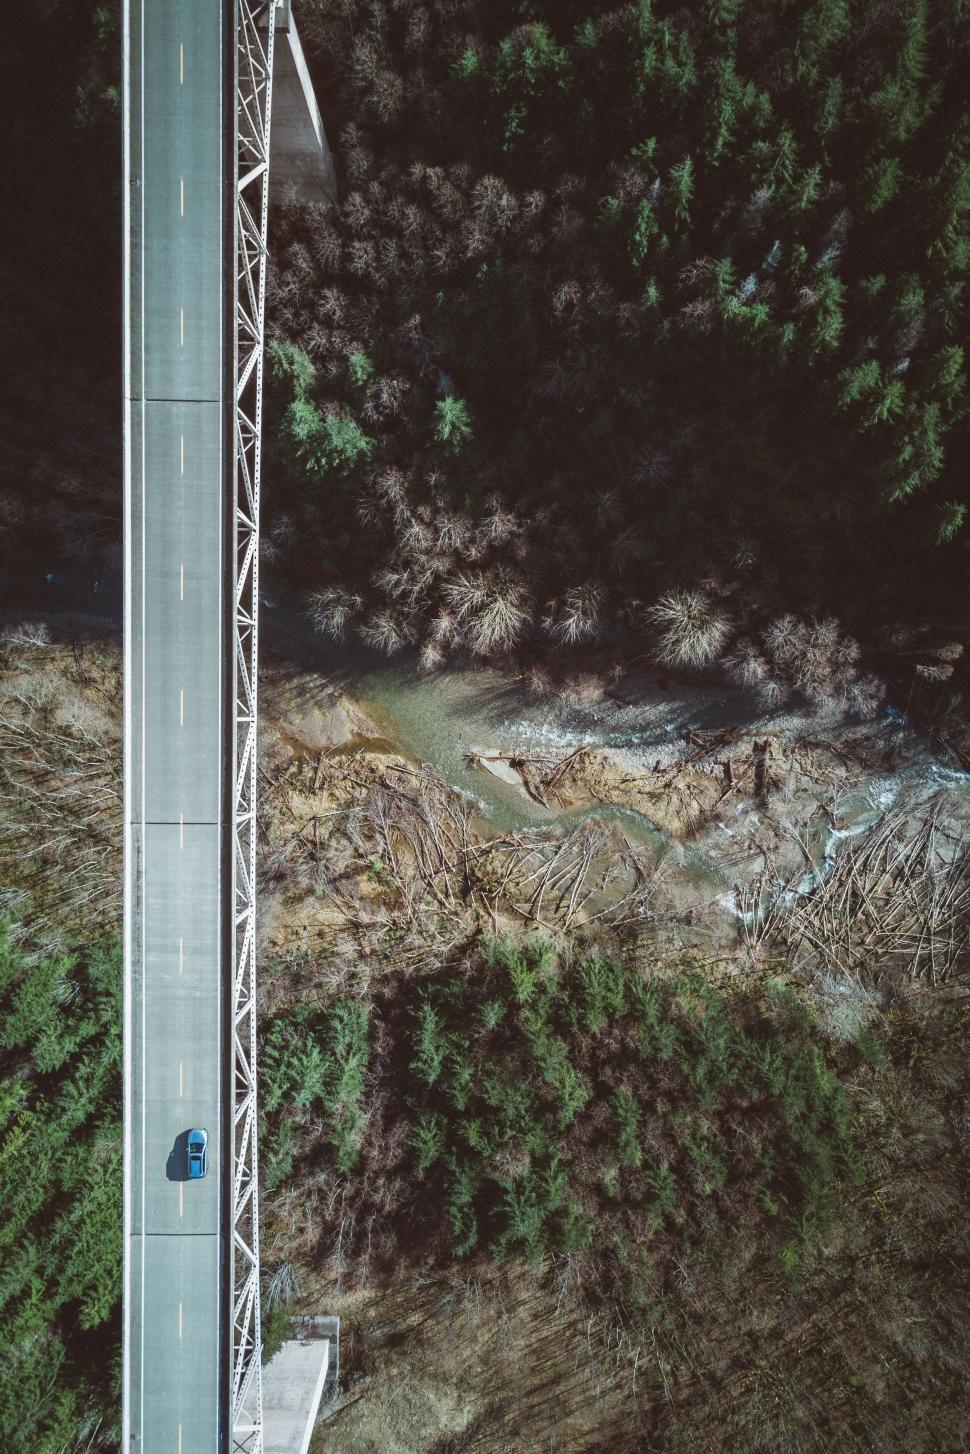 Free Image of Aerial View of Bridge Over River 